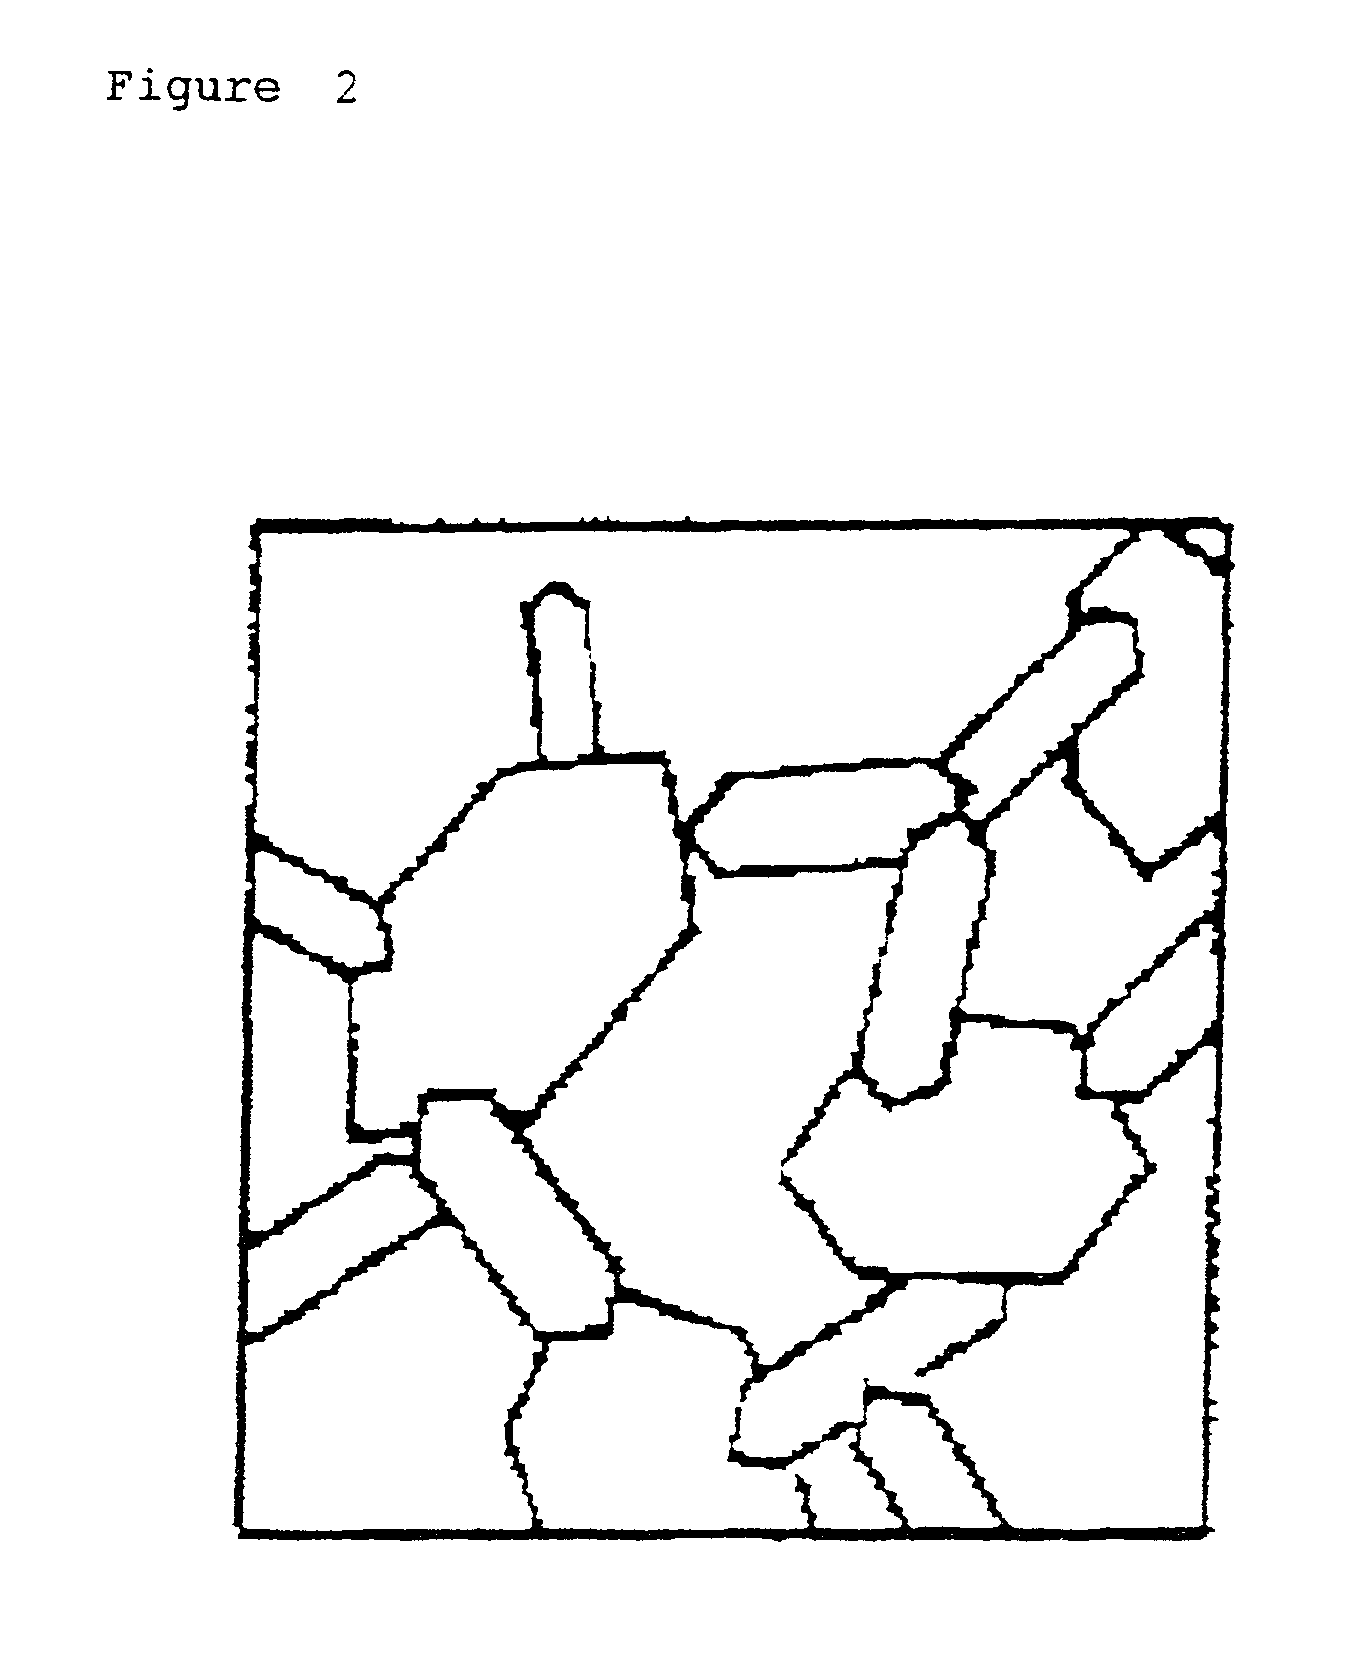 Lipid particles on the basis of mixtures of liquid and solid lipids and method for producing same